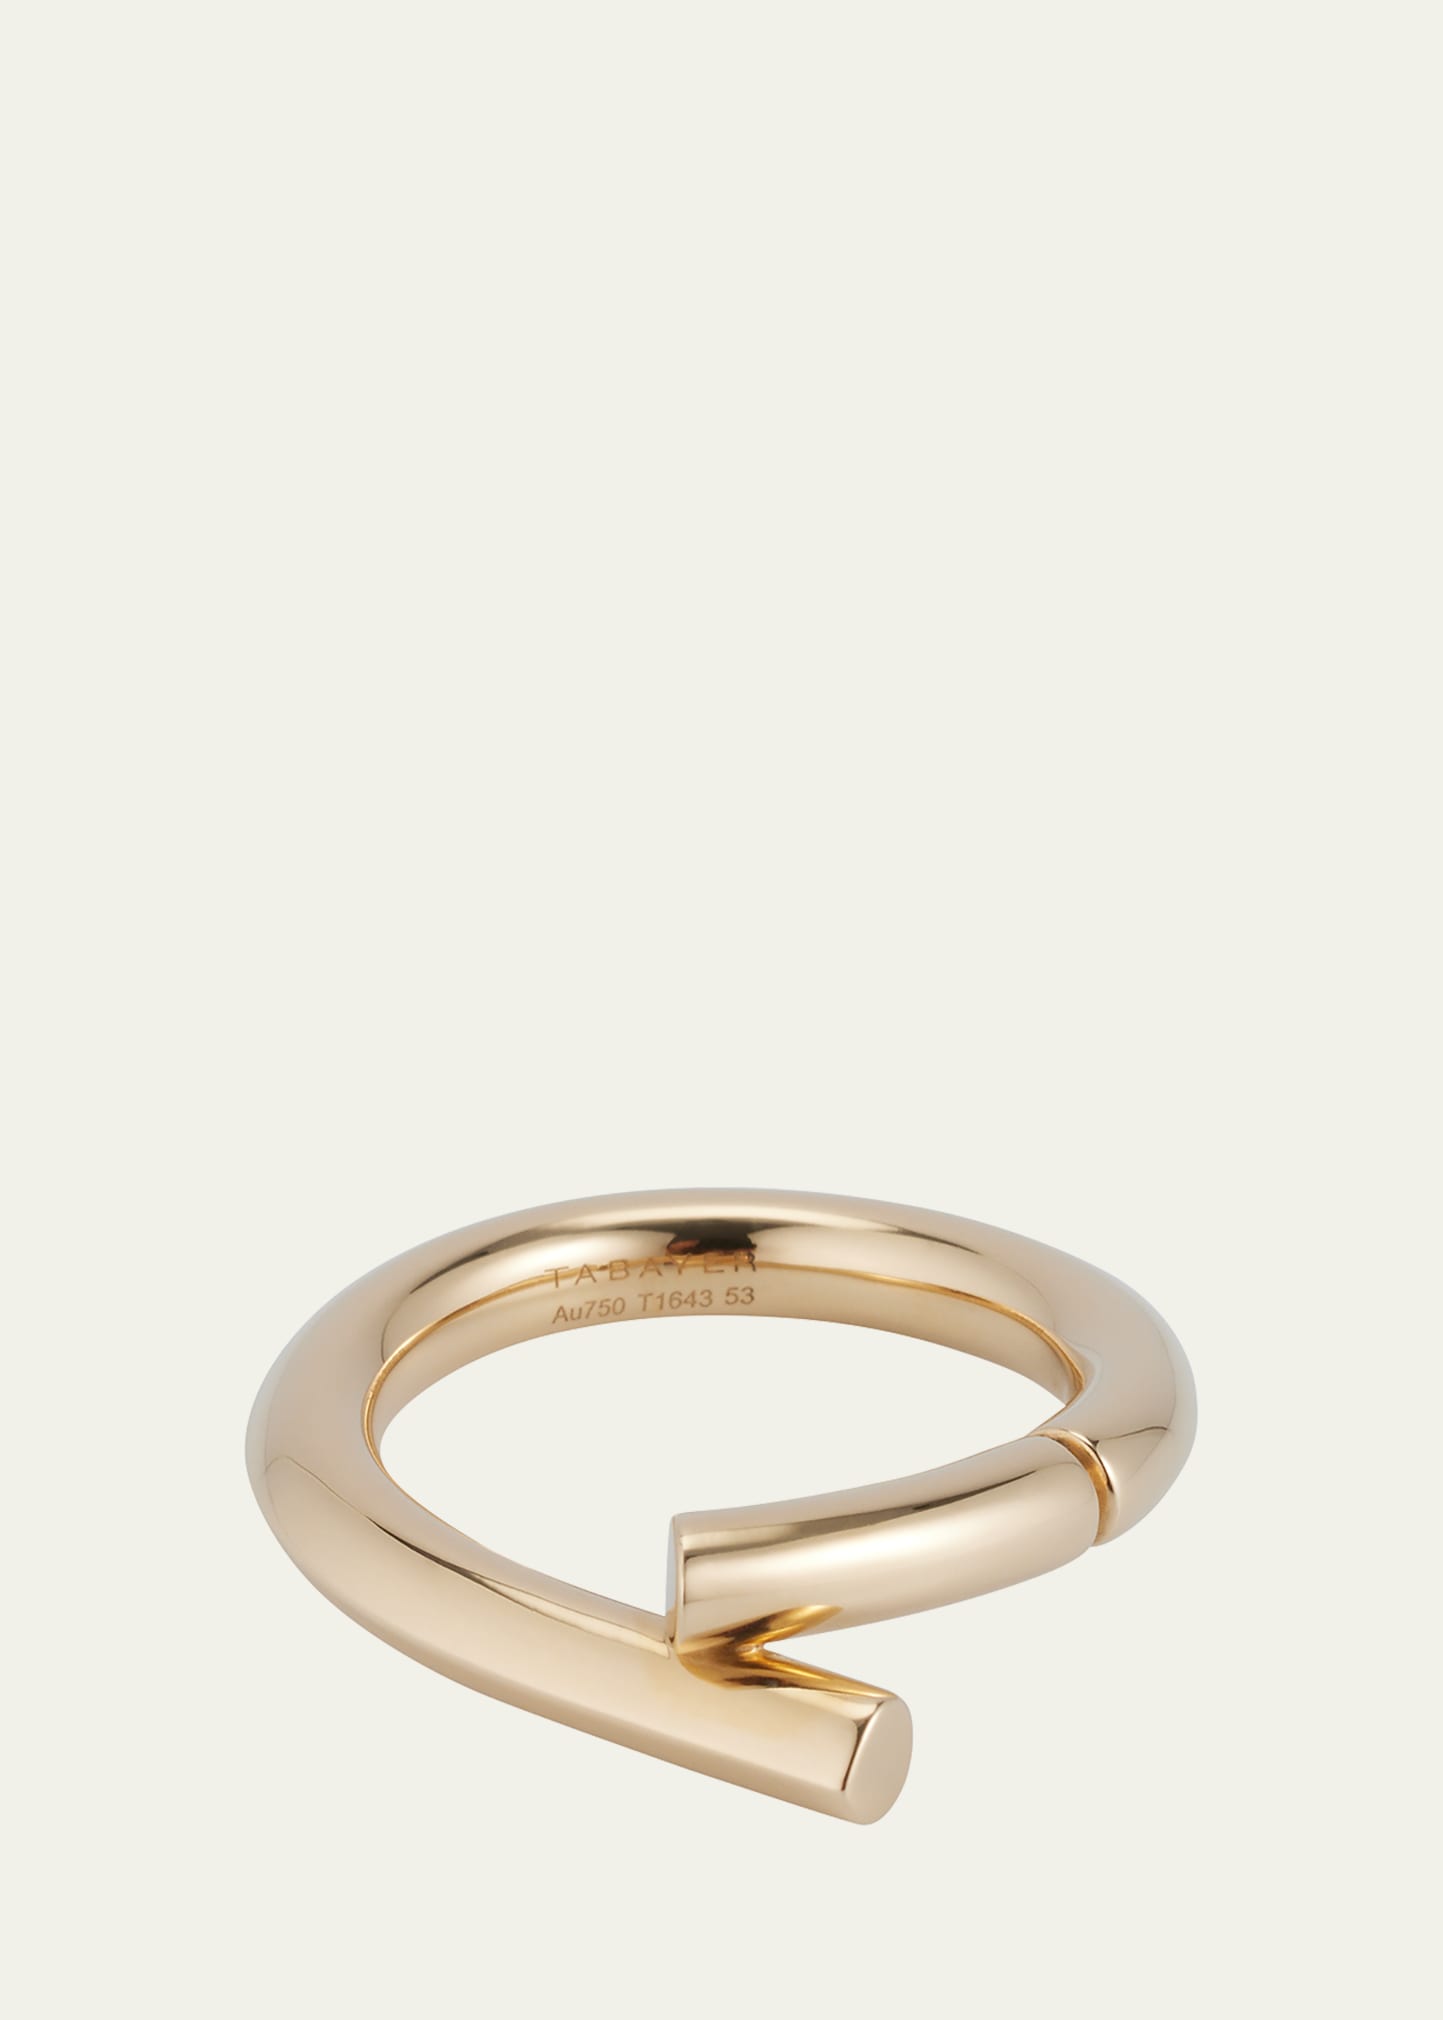 18k Fairmined Yellow Gold Oera Ring, Size 53